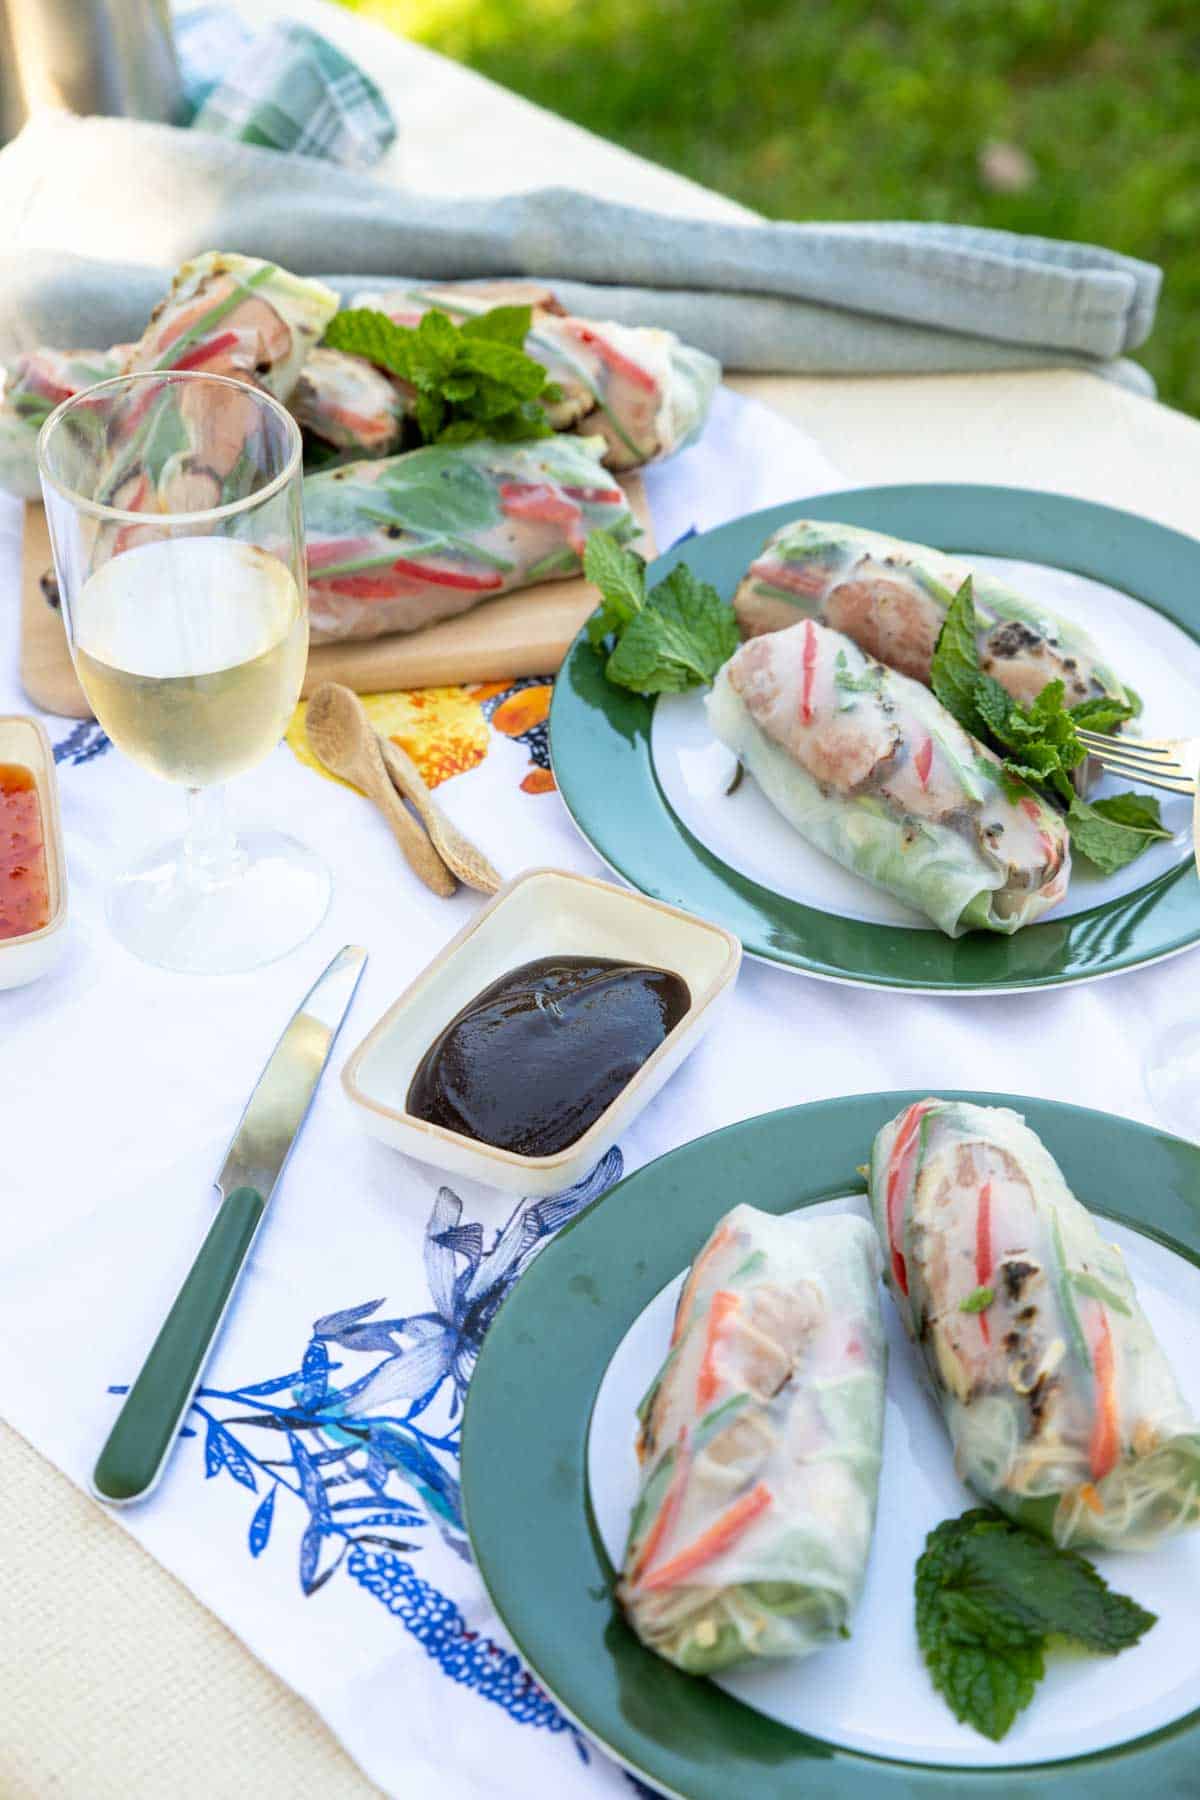 A picnic table with plates of summer rolls, asian sauces and glasses of wine.